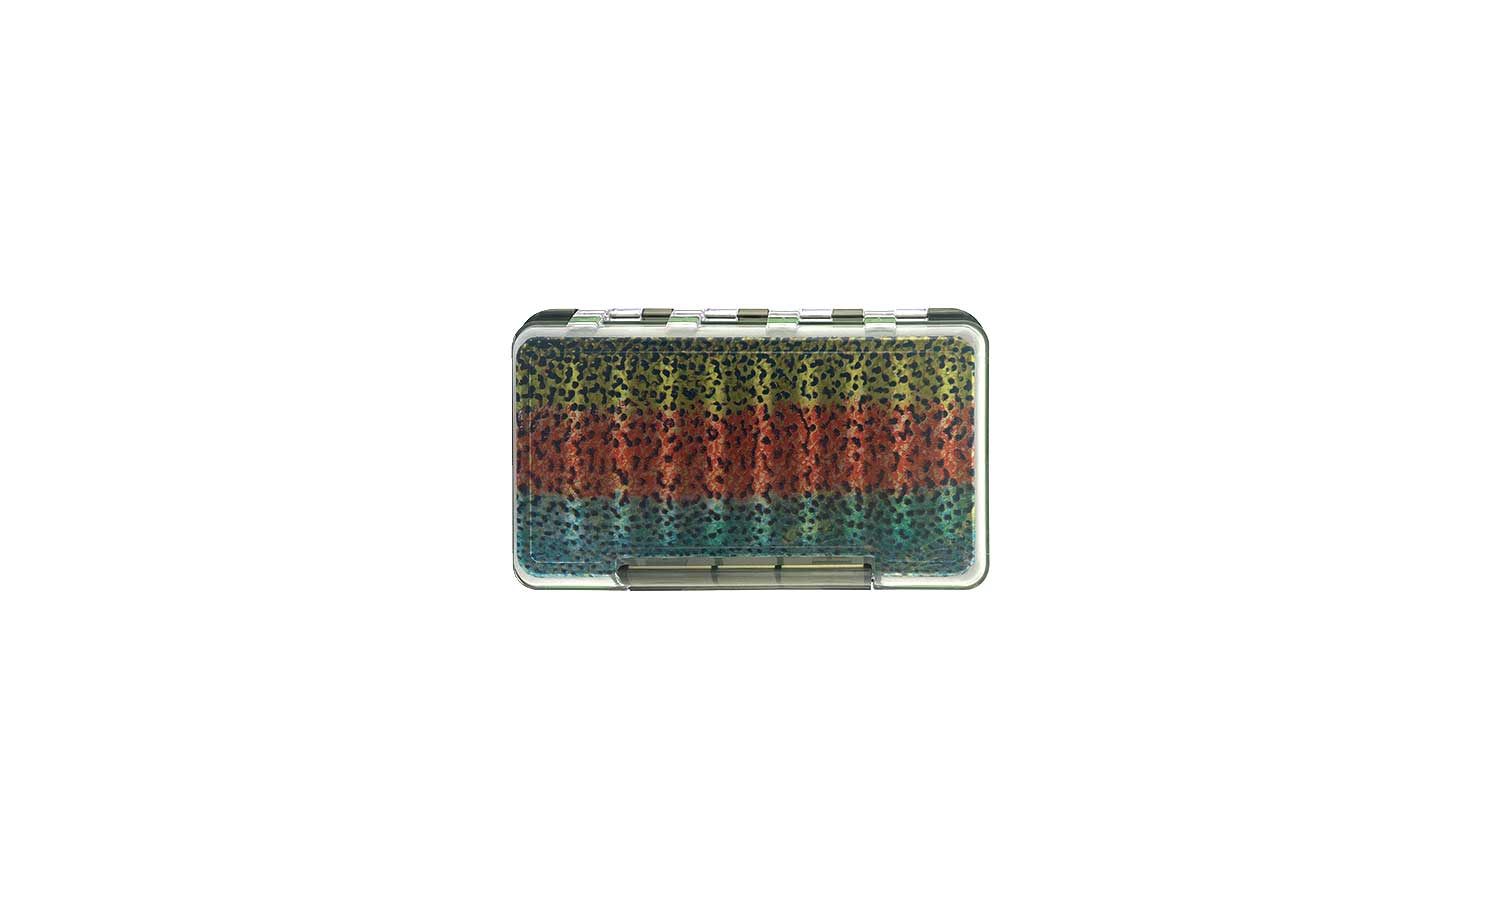 Deluxe Bead Box with 11 Compartments